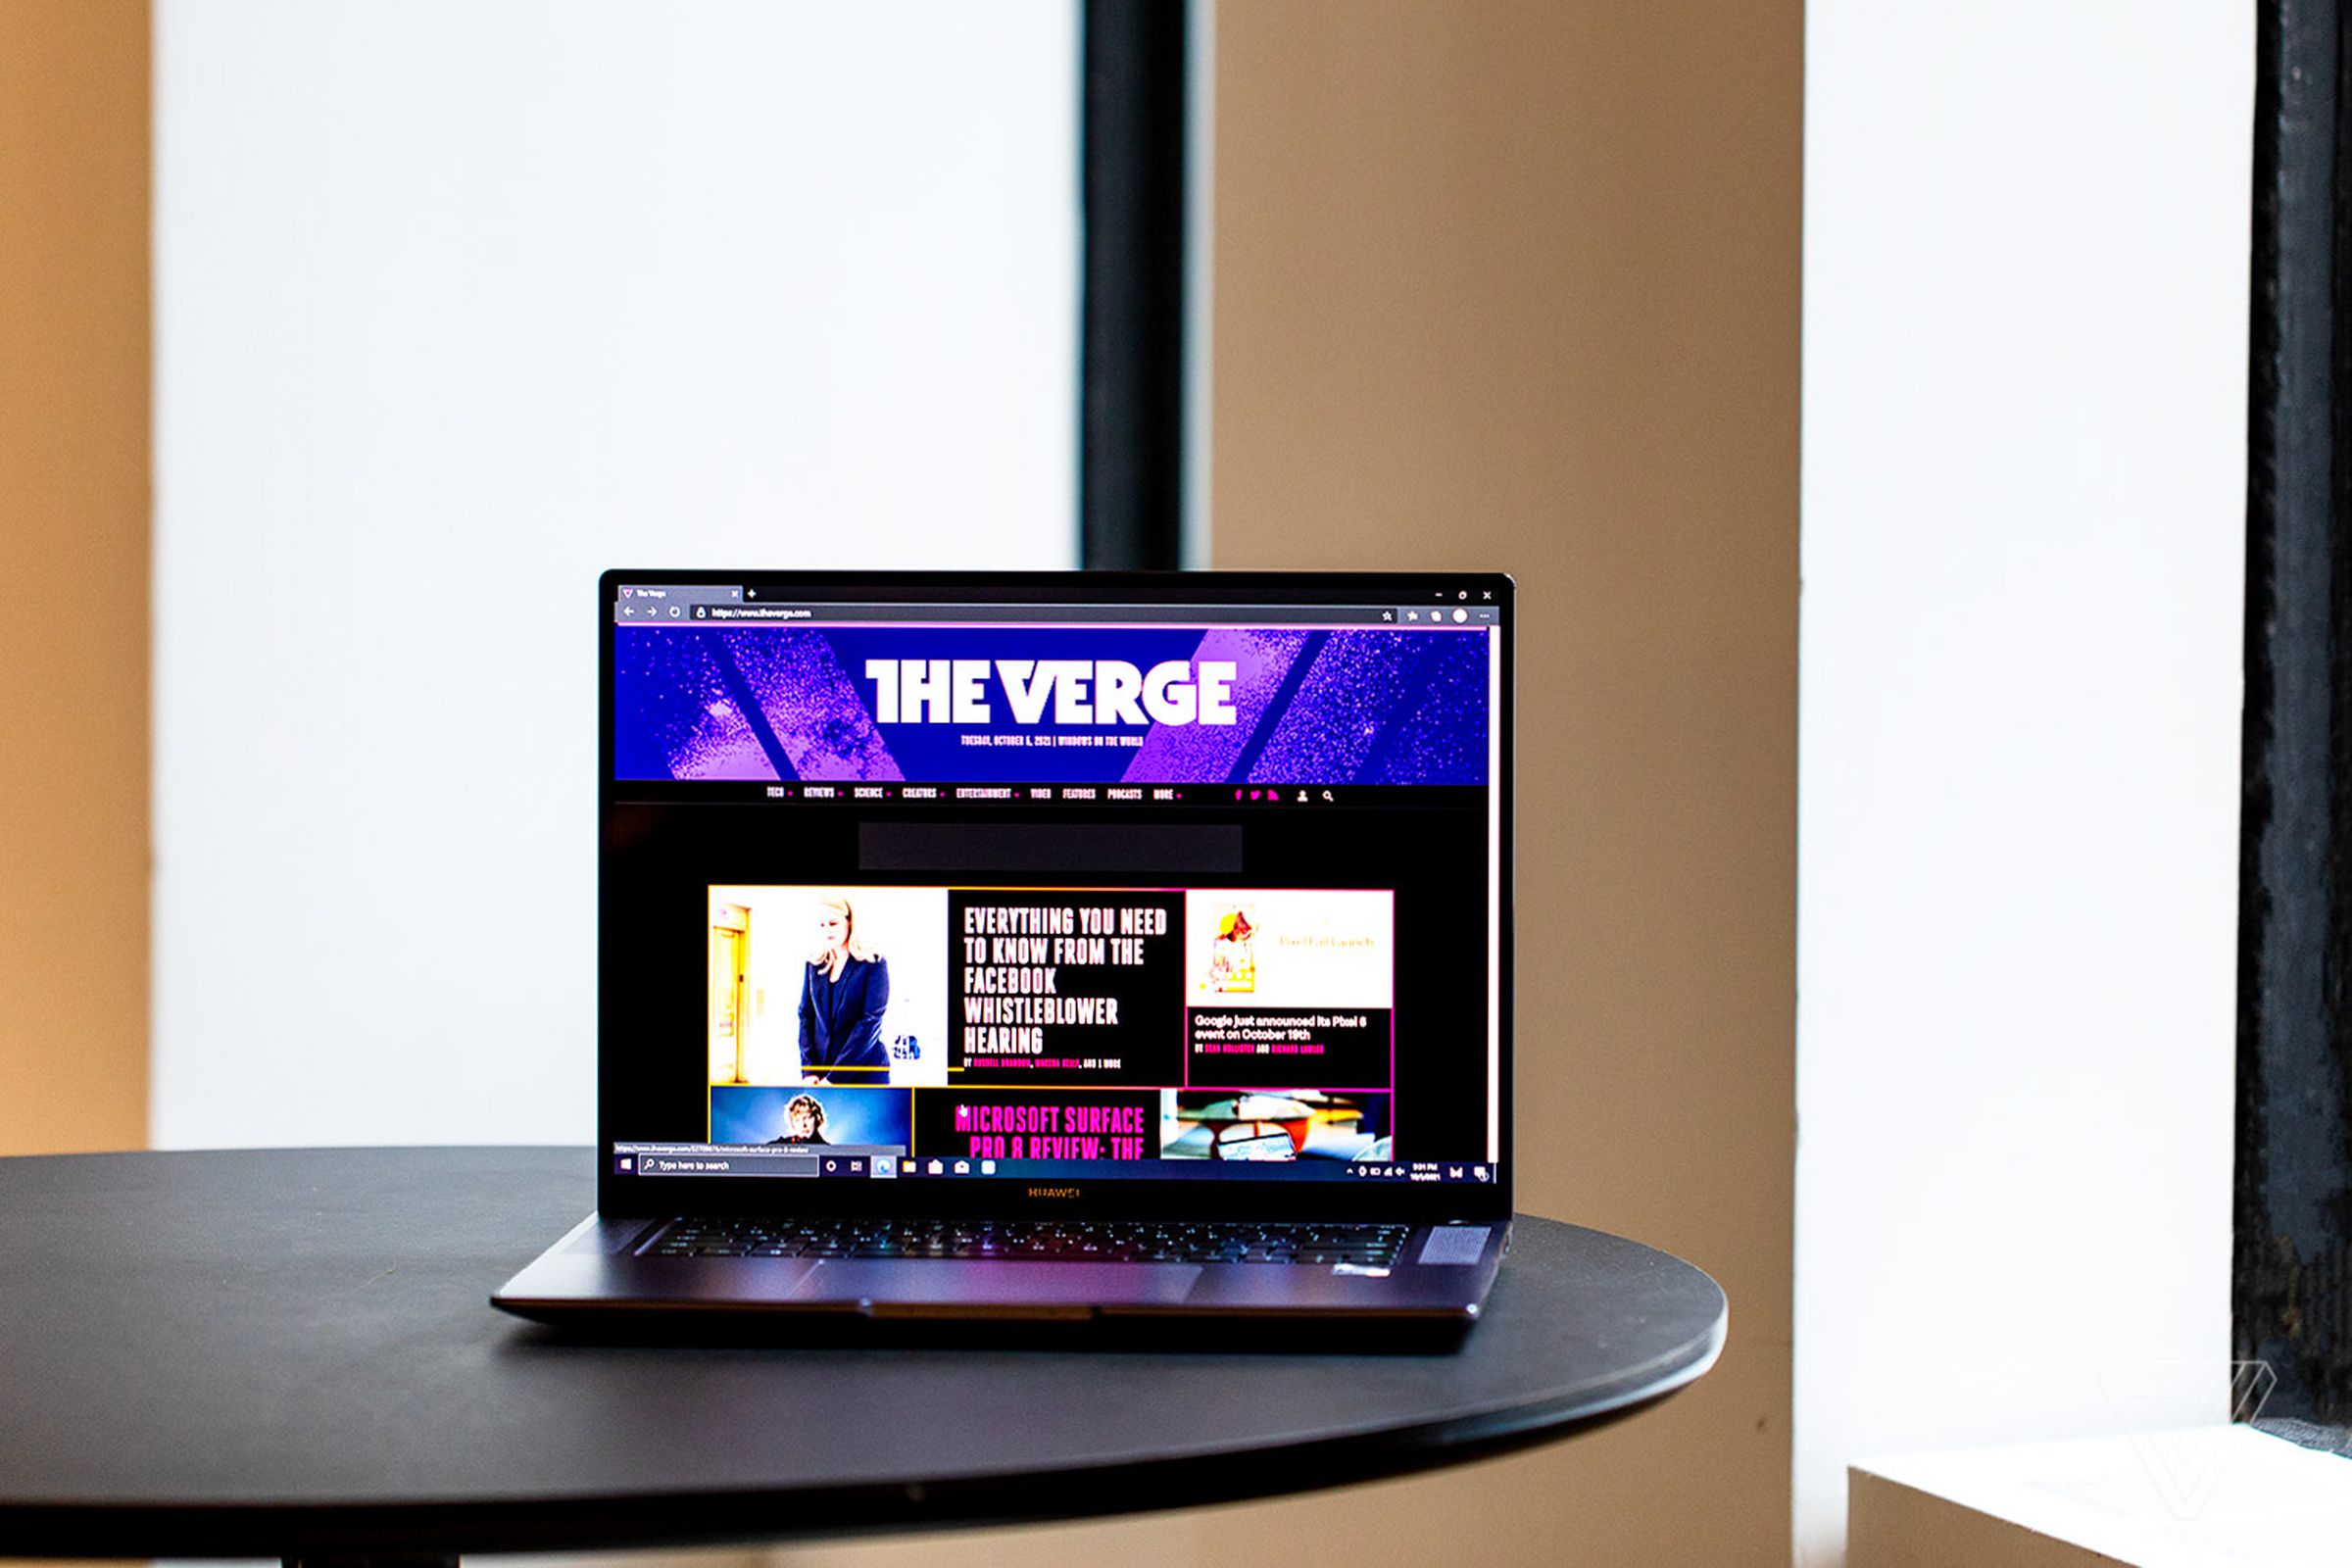 The Huawei MateBook 16 on a black table facing forward, open. The screen displays The Verge homepage.